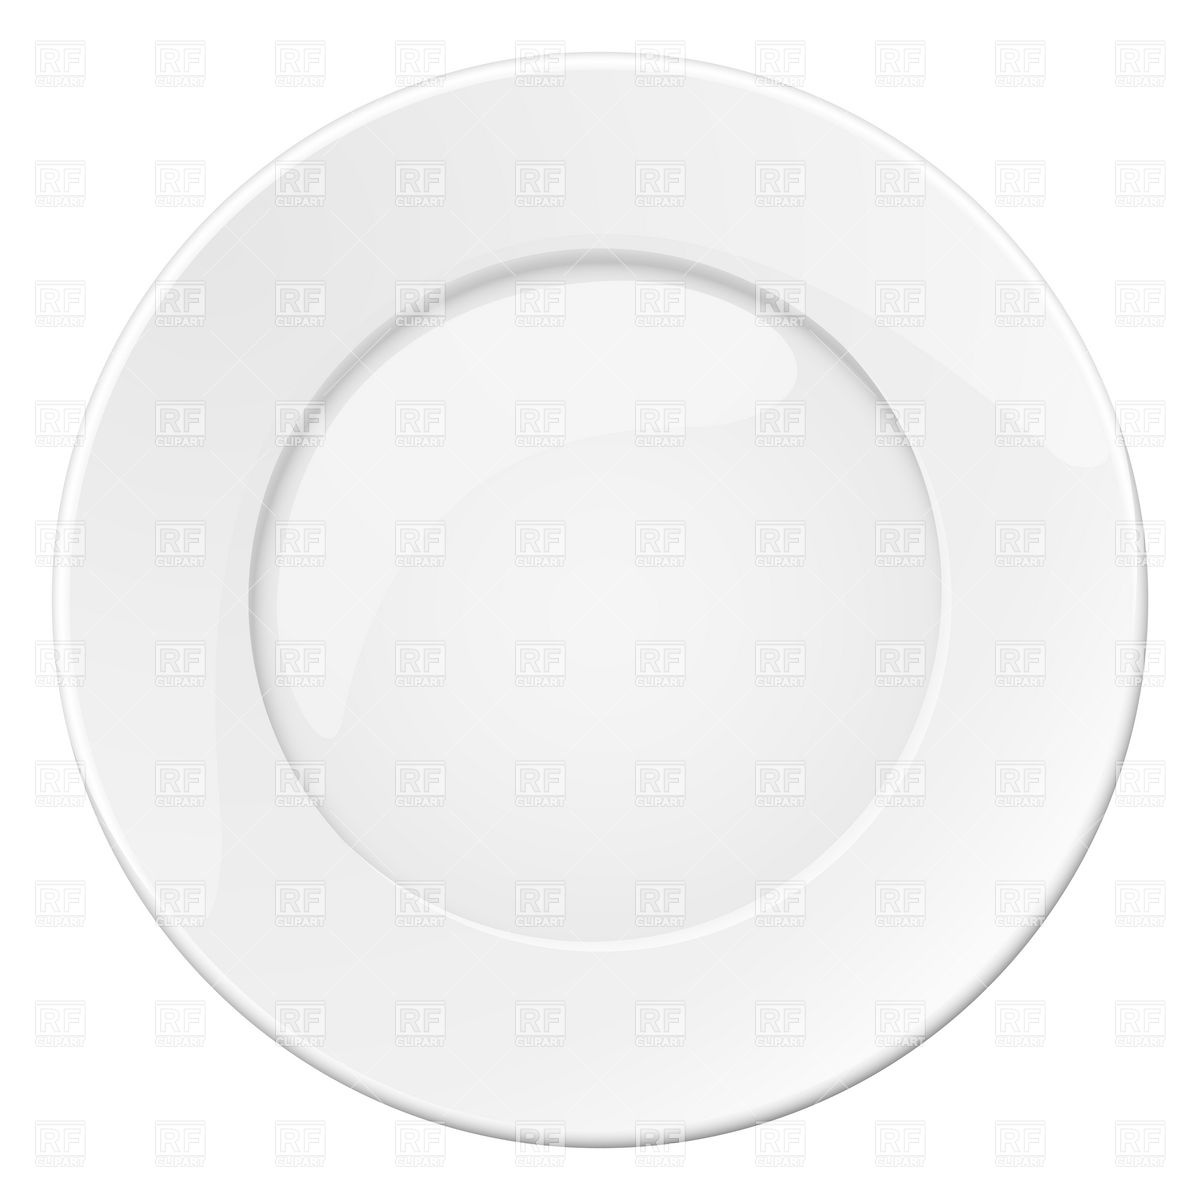     Clipart  Crumbs On A Plate Clipart  Plate Clipart Black And White